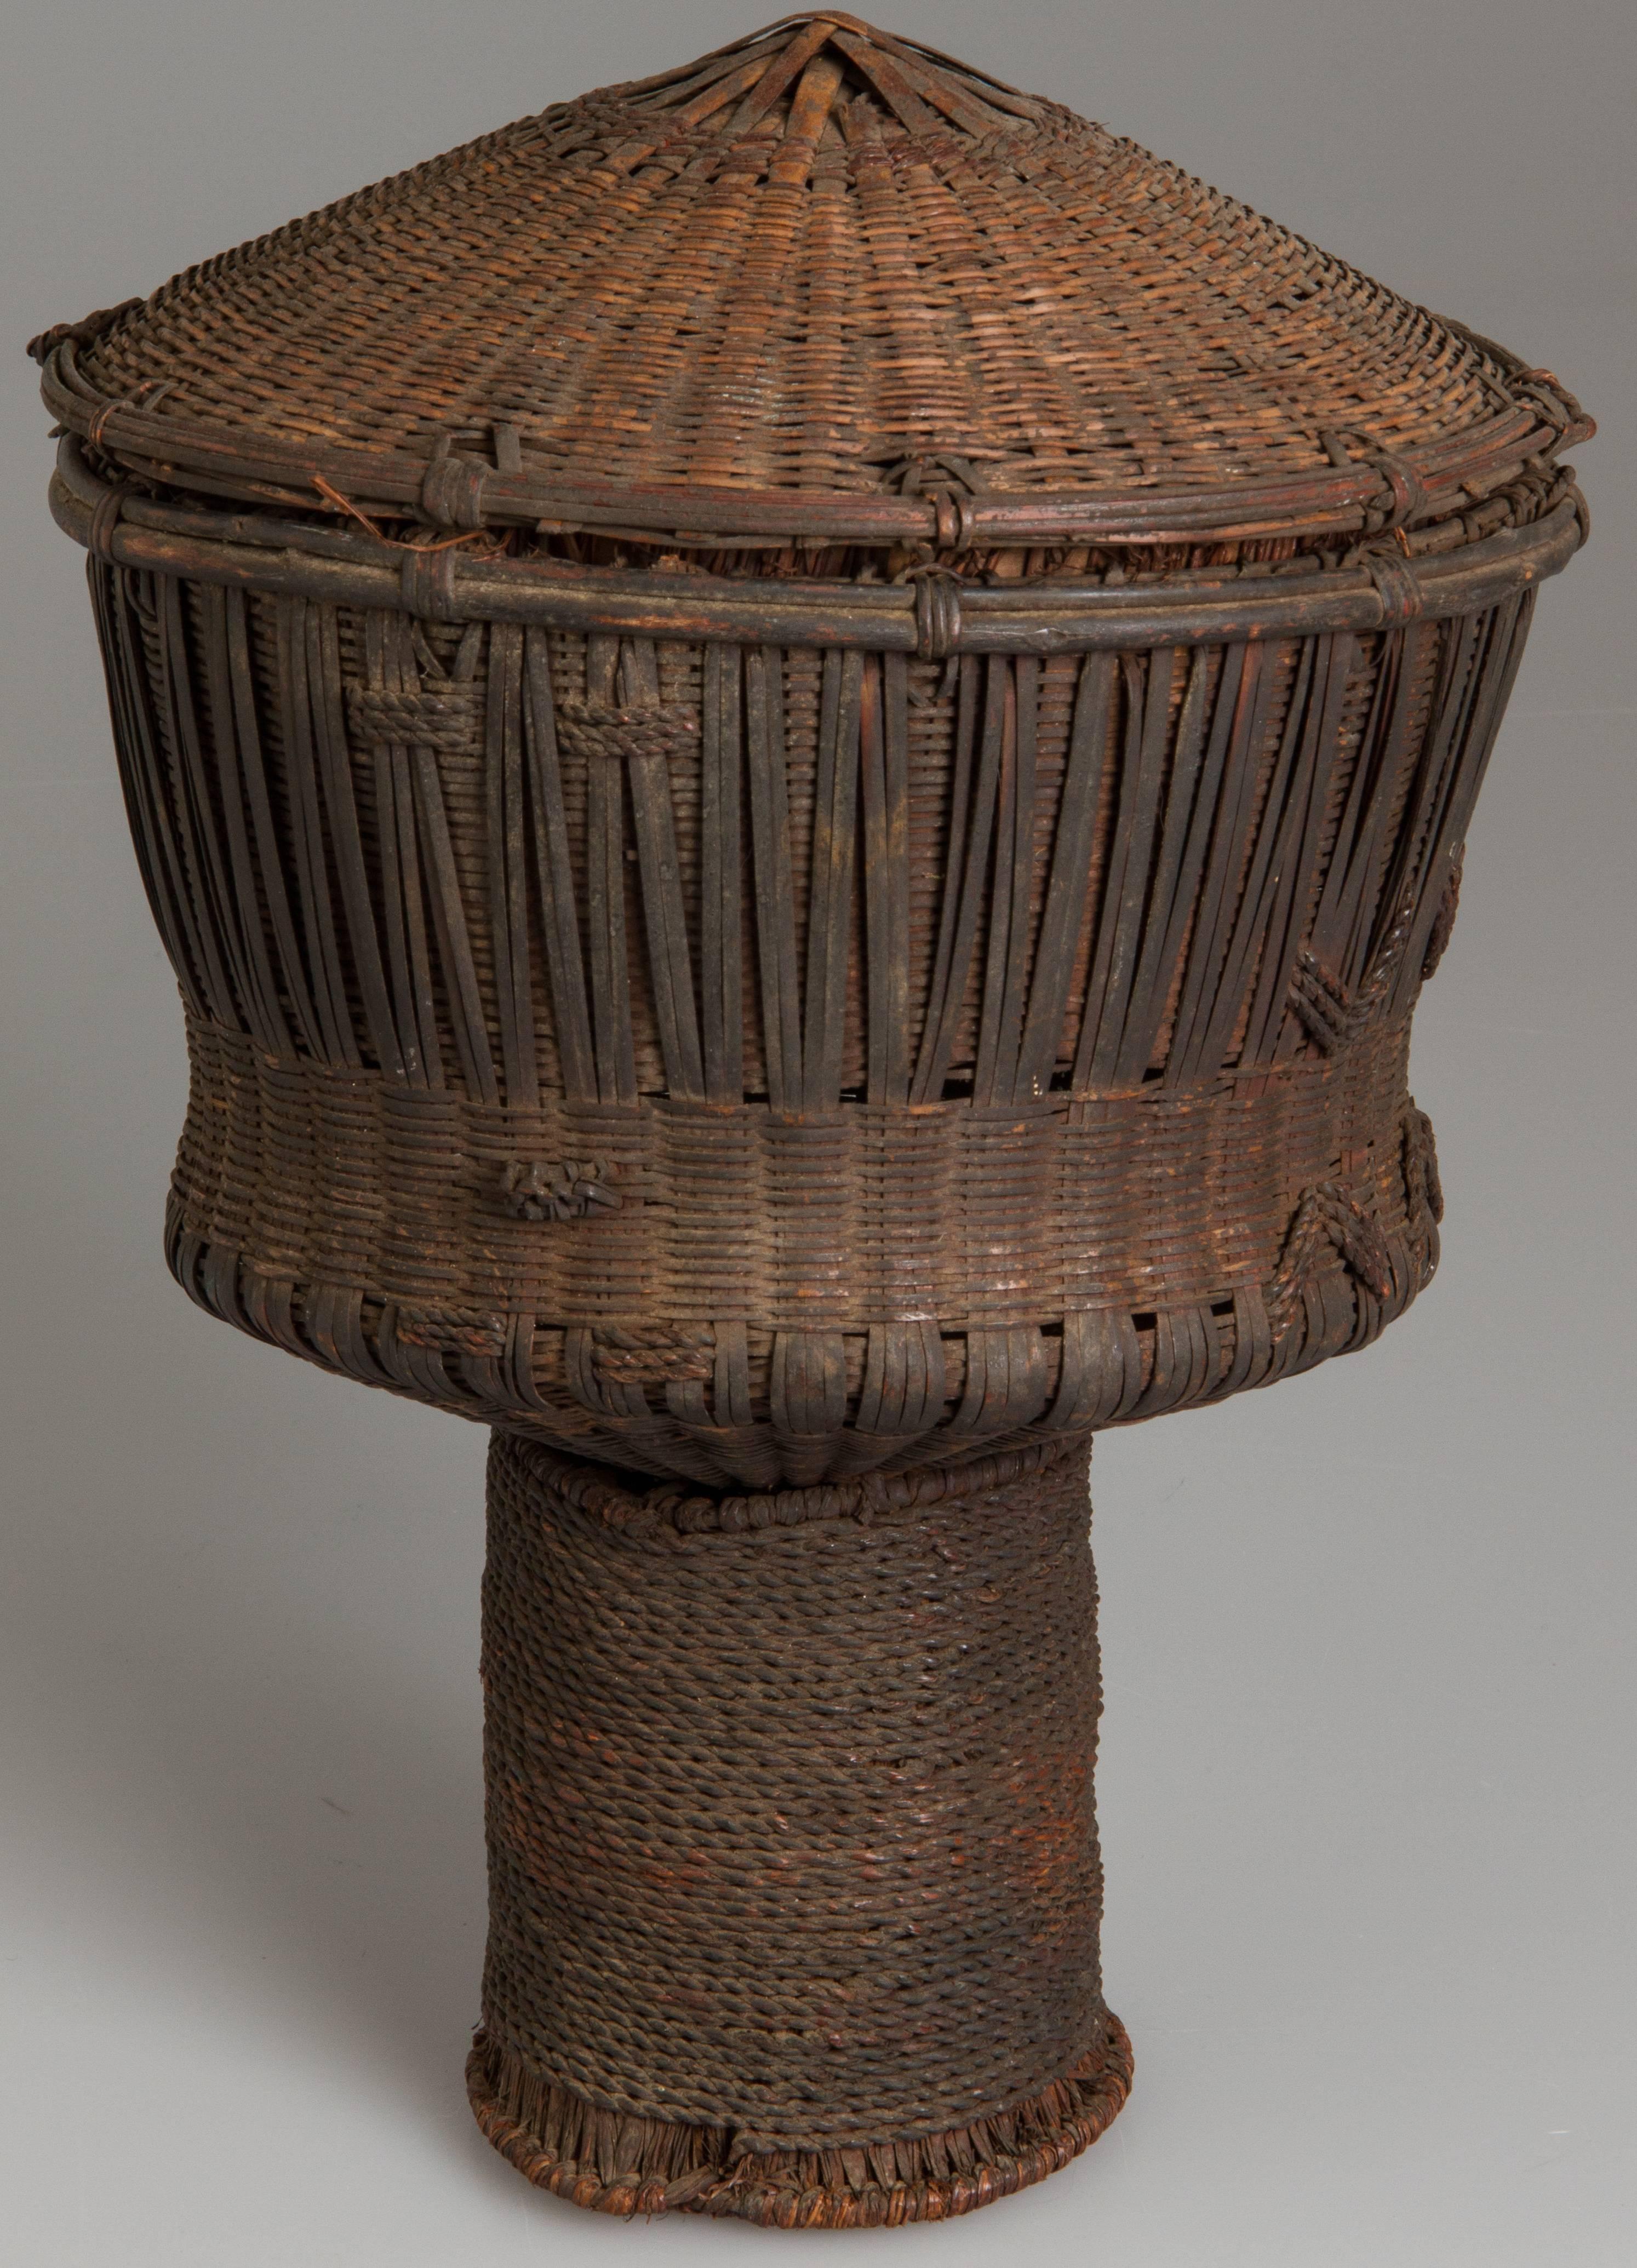 Cameroonian Unusual Cameroon Wum Basket from the area around Bamenda, SW Cameroon